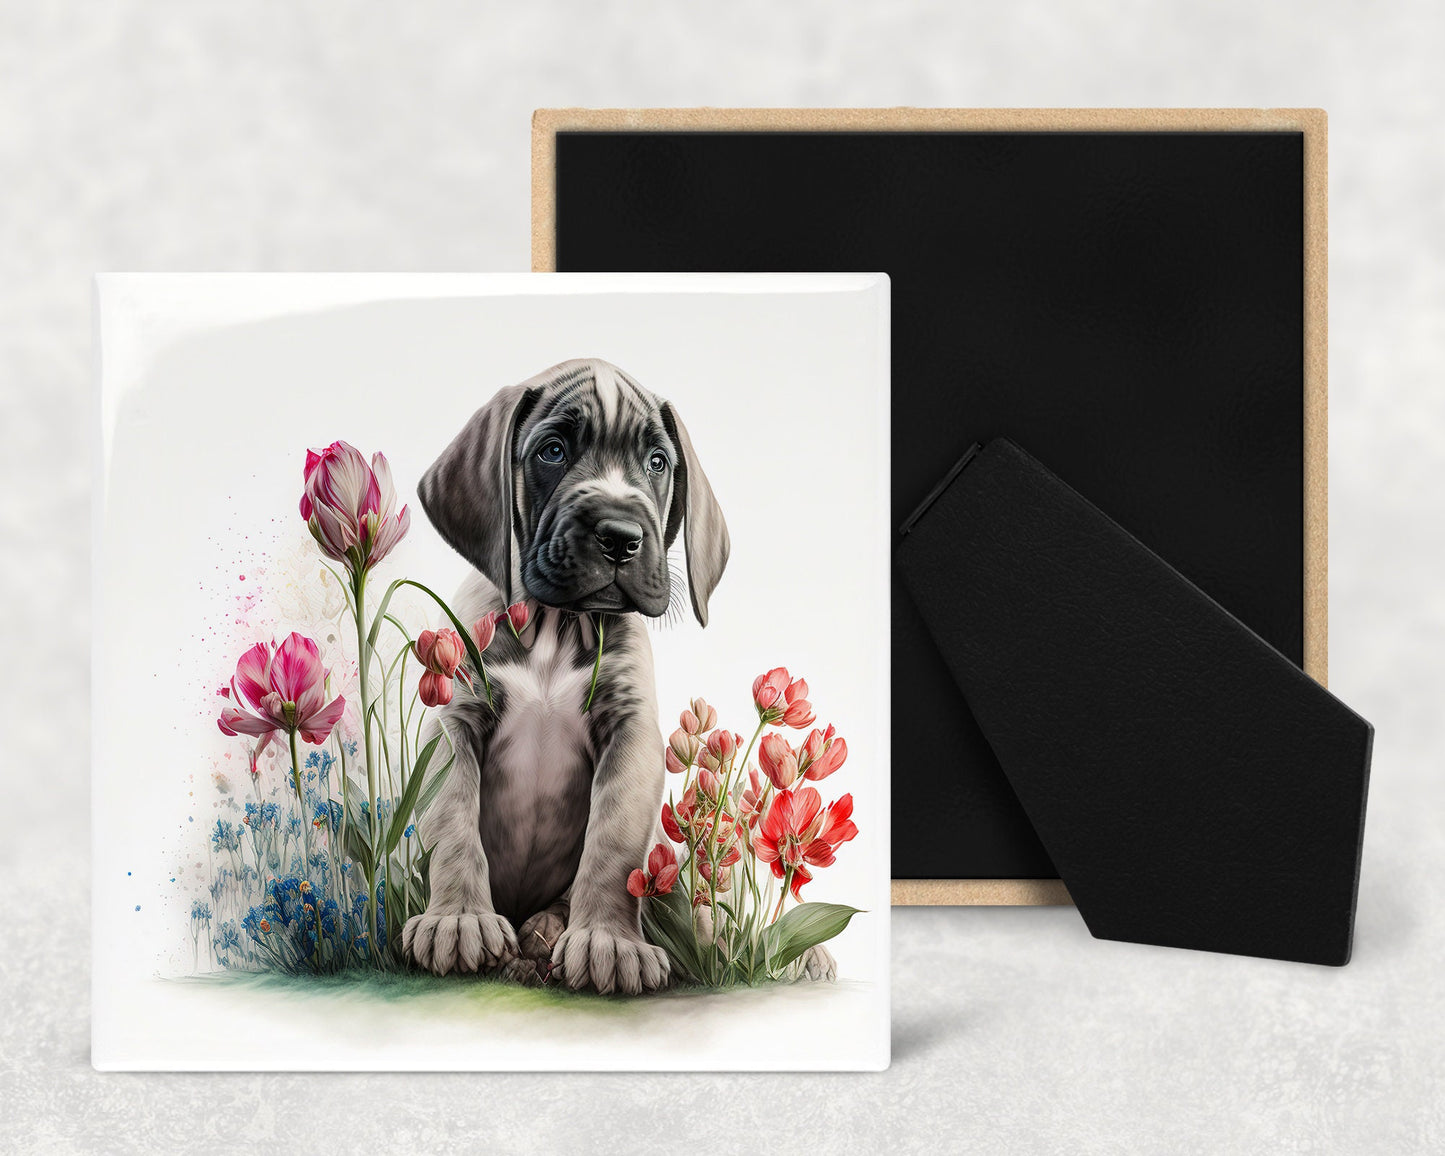 Cute Great Dane Puppy Art Decorative Ceramic Tile Set with Optional Easel Back - Available in 4 sizes - Set of 4